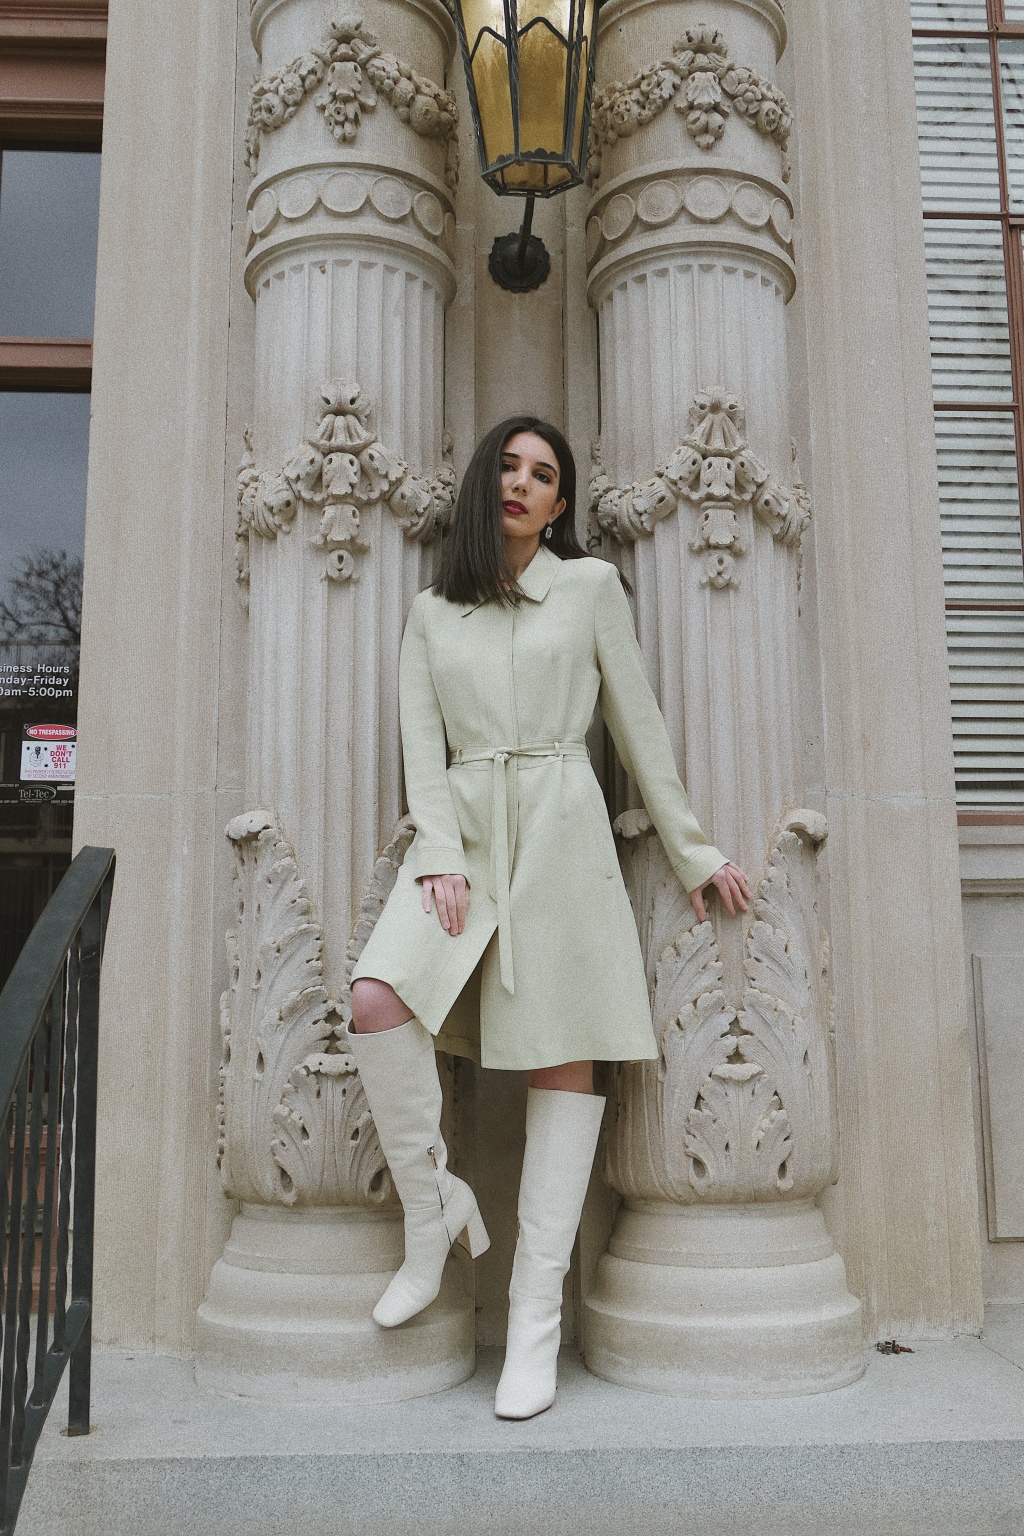 Pistachio dress, trench coat dress, green dress, Barneys New York, rhinestone earrings, midi dress, mid-length dress, button-down dress, vintage, vintage dress, vintage finds, mod, mod style, ‘60s fashion, go-go boots, white boots, knee-high boots, white knee-high boots, Stuart Weitzman, fashion blogger, what I wore, wiw, outfit of the day, ootd, Tezza App